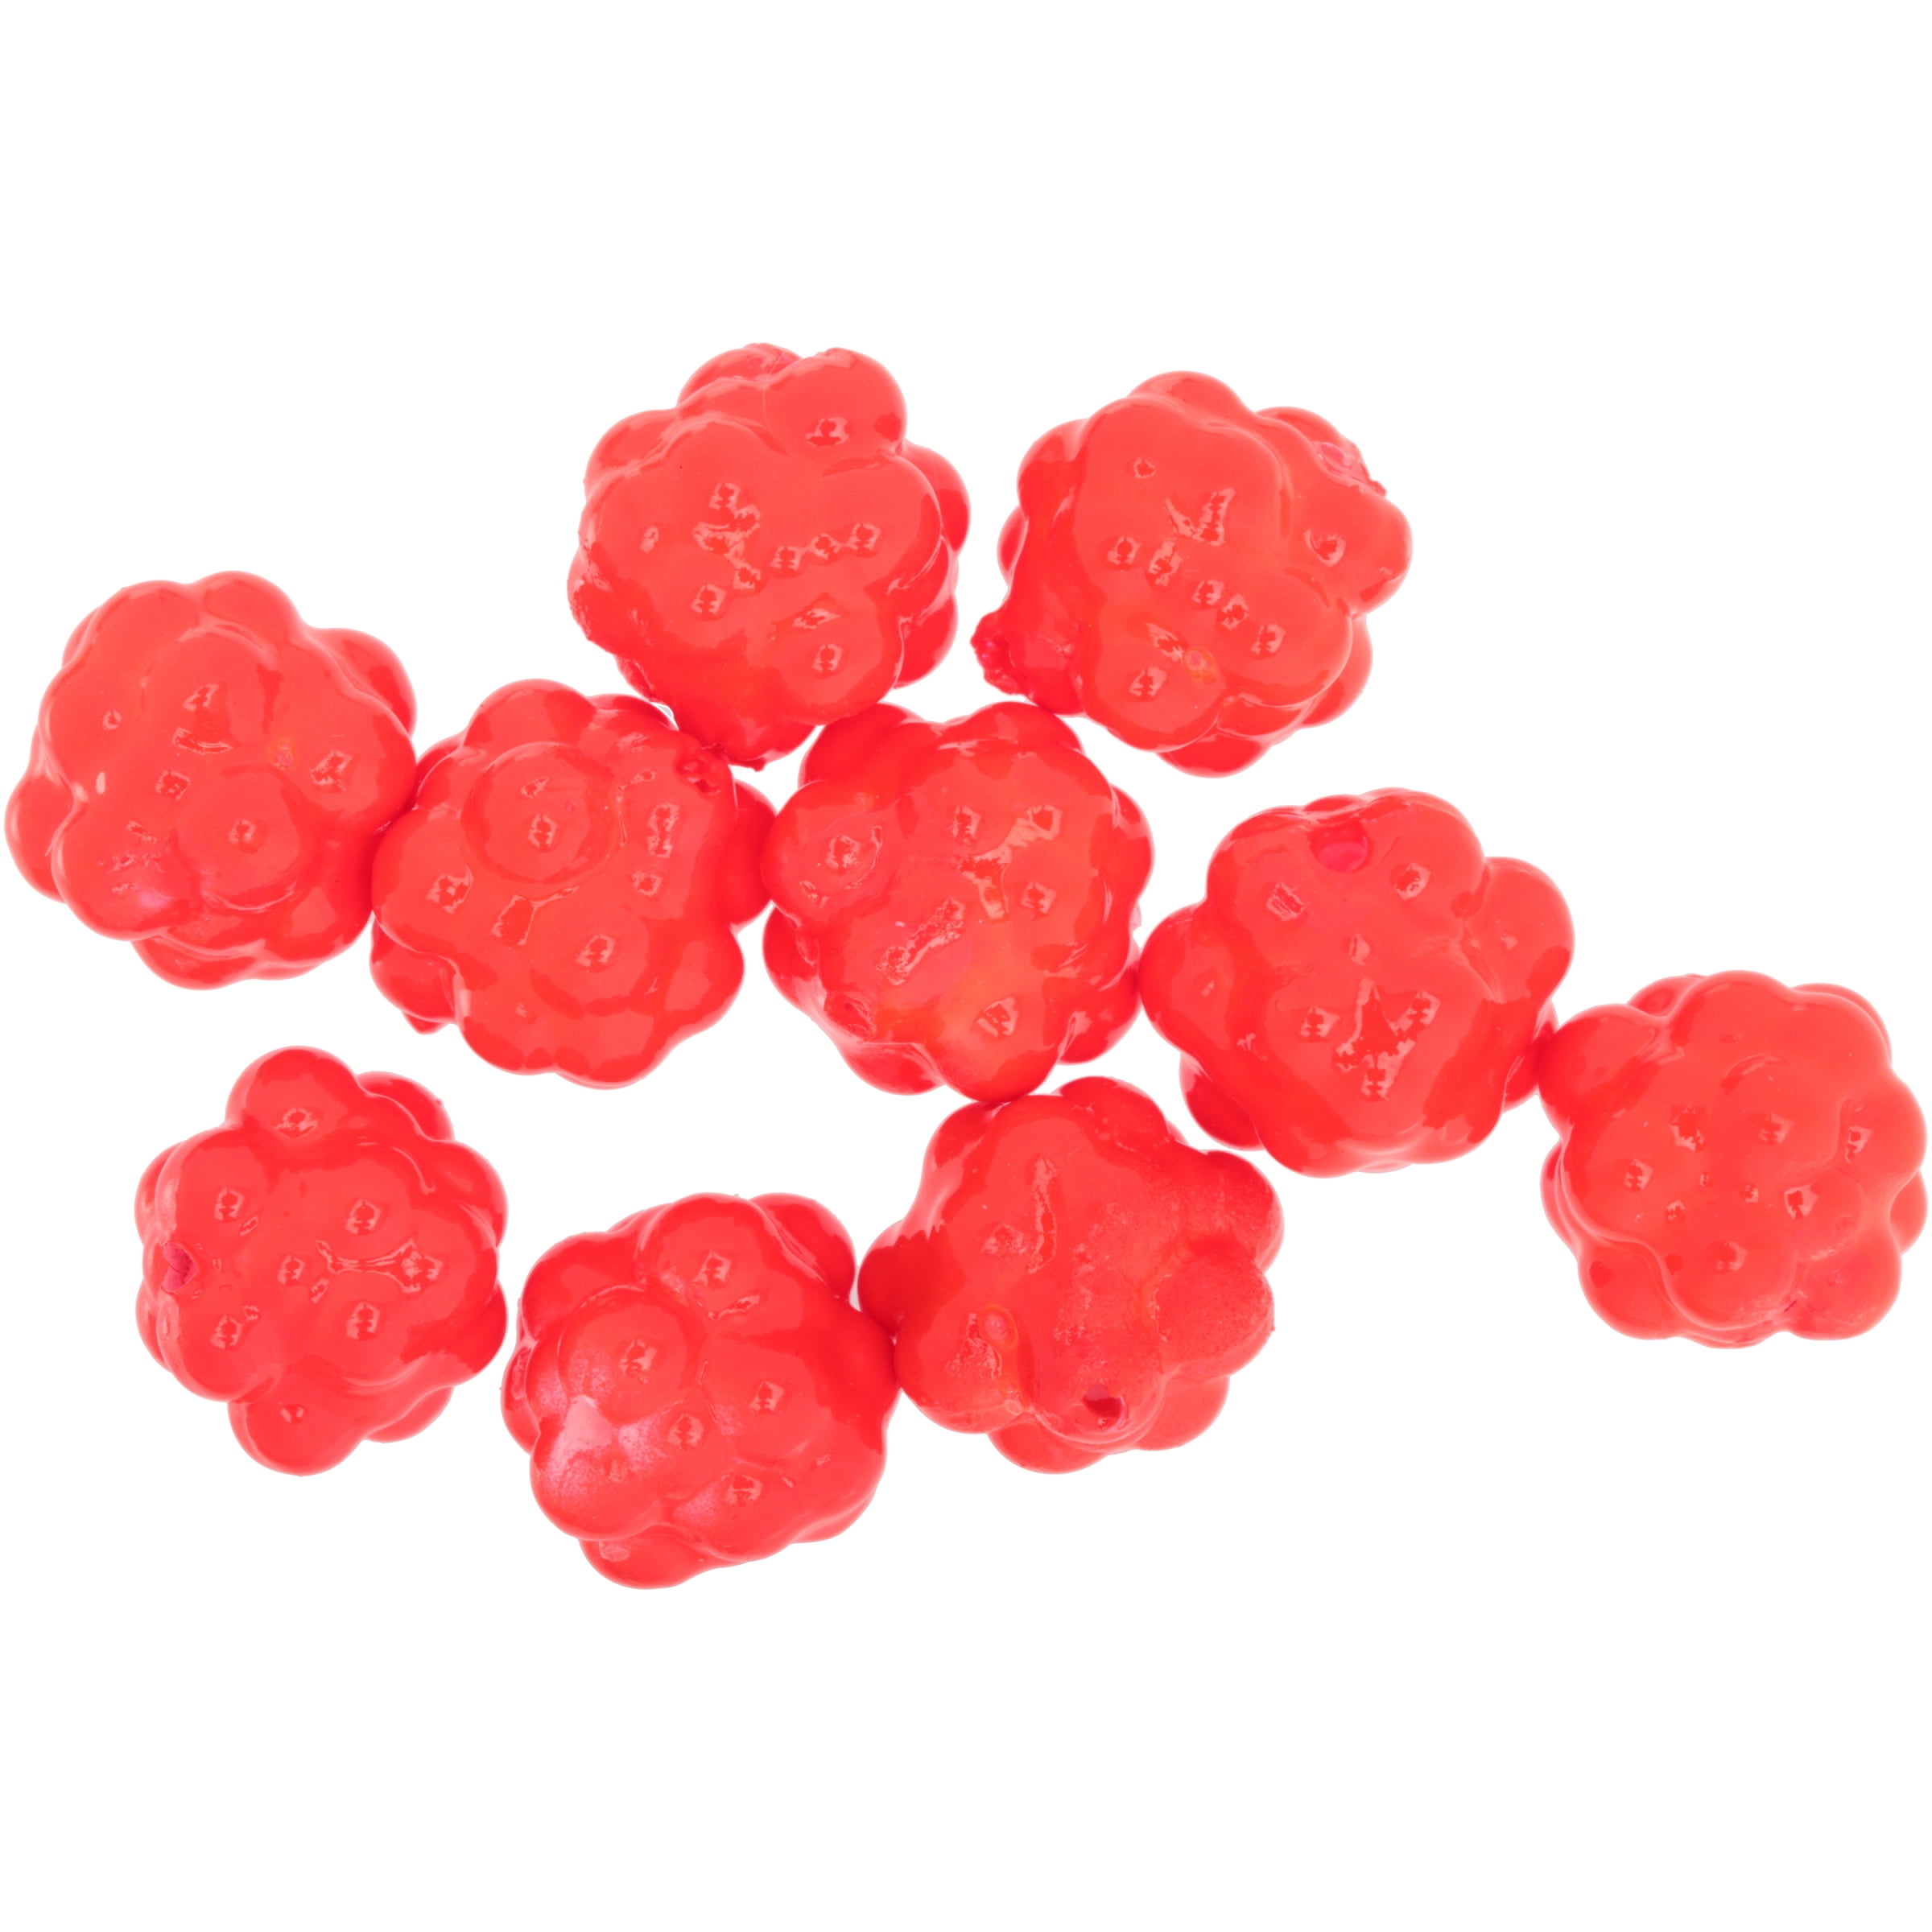 Worden's Lil' Corky Clusters Size 7 Rocket Red Fishing Bait 10 Ct. Carded Pack